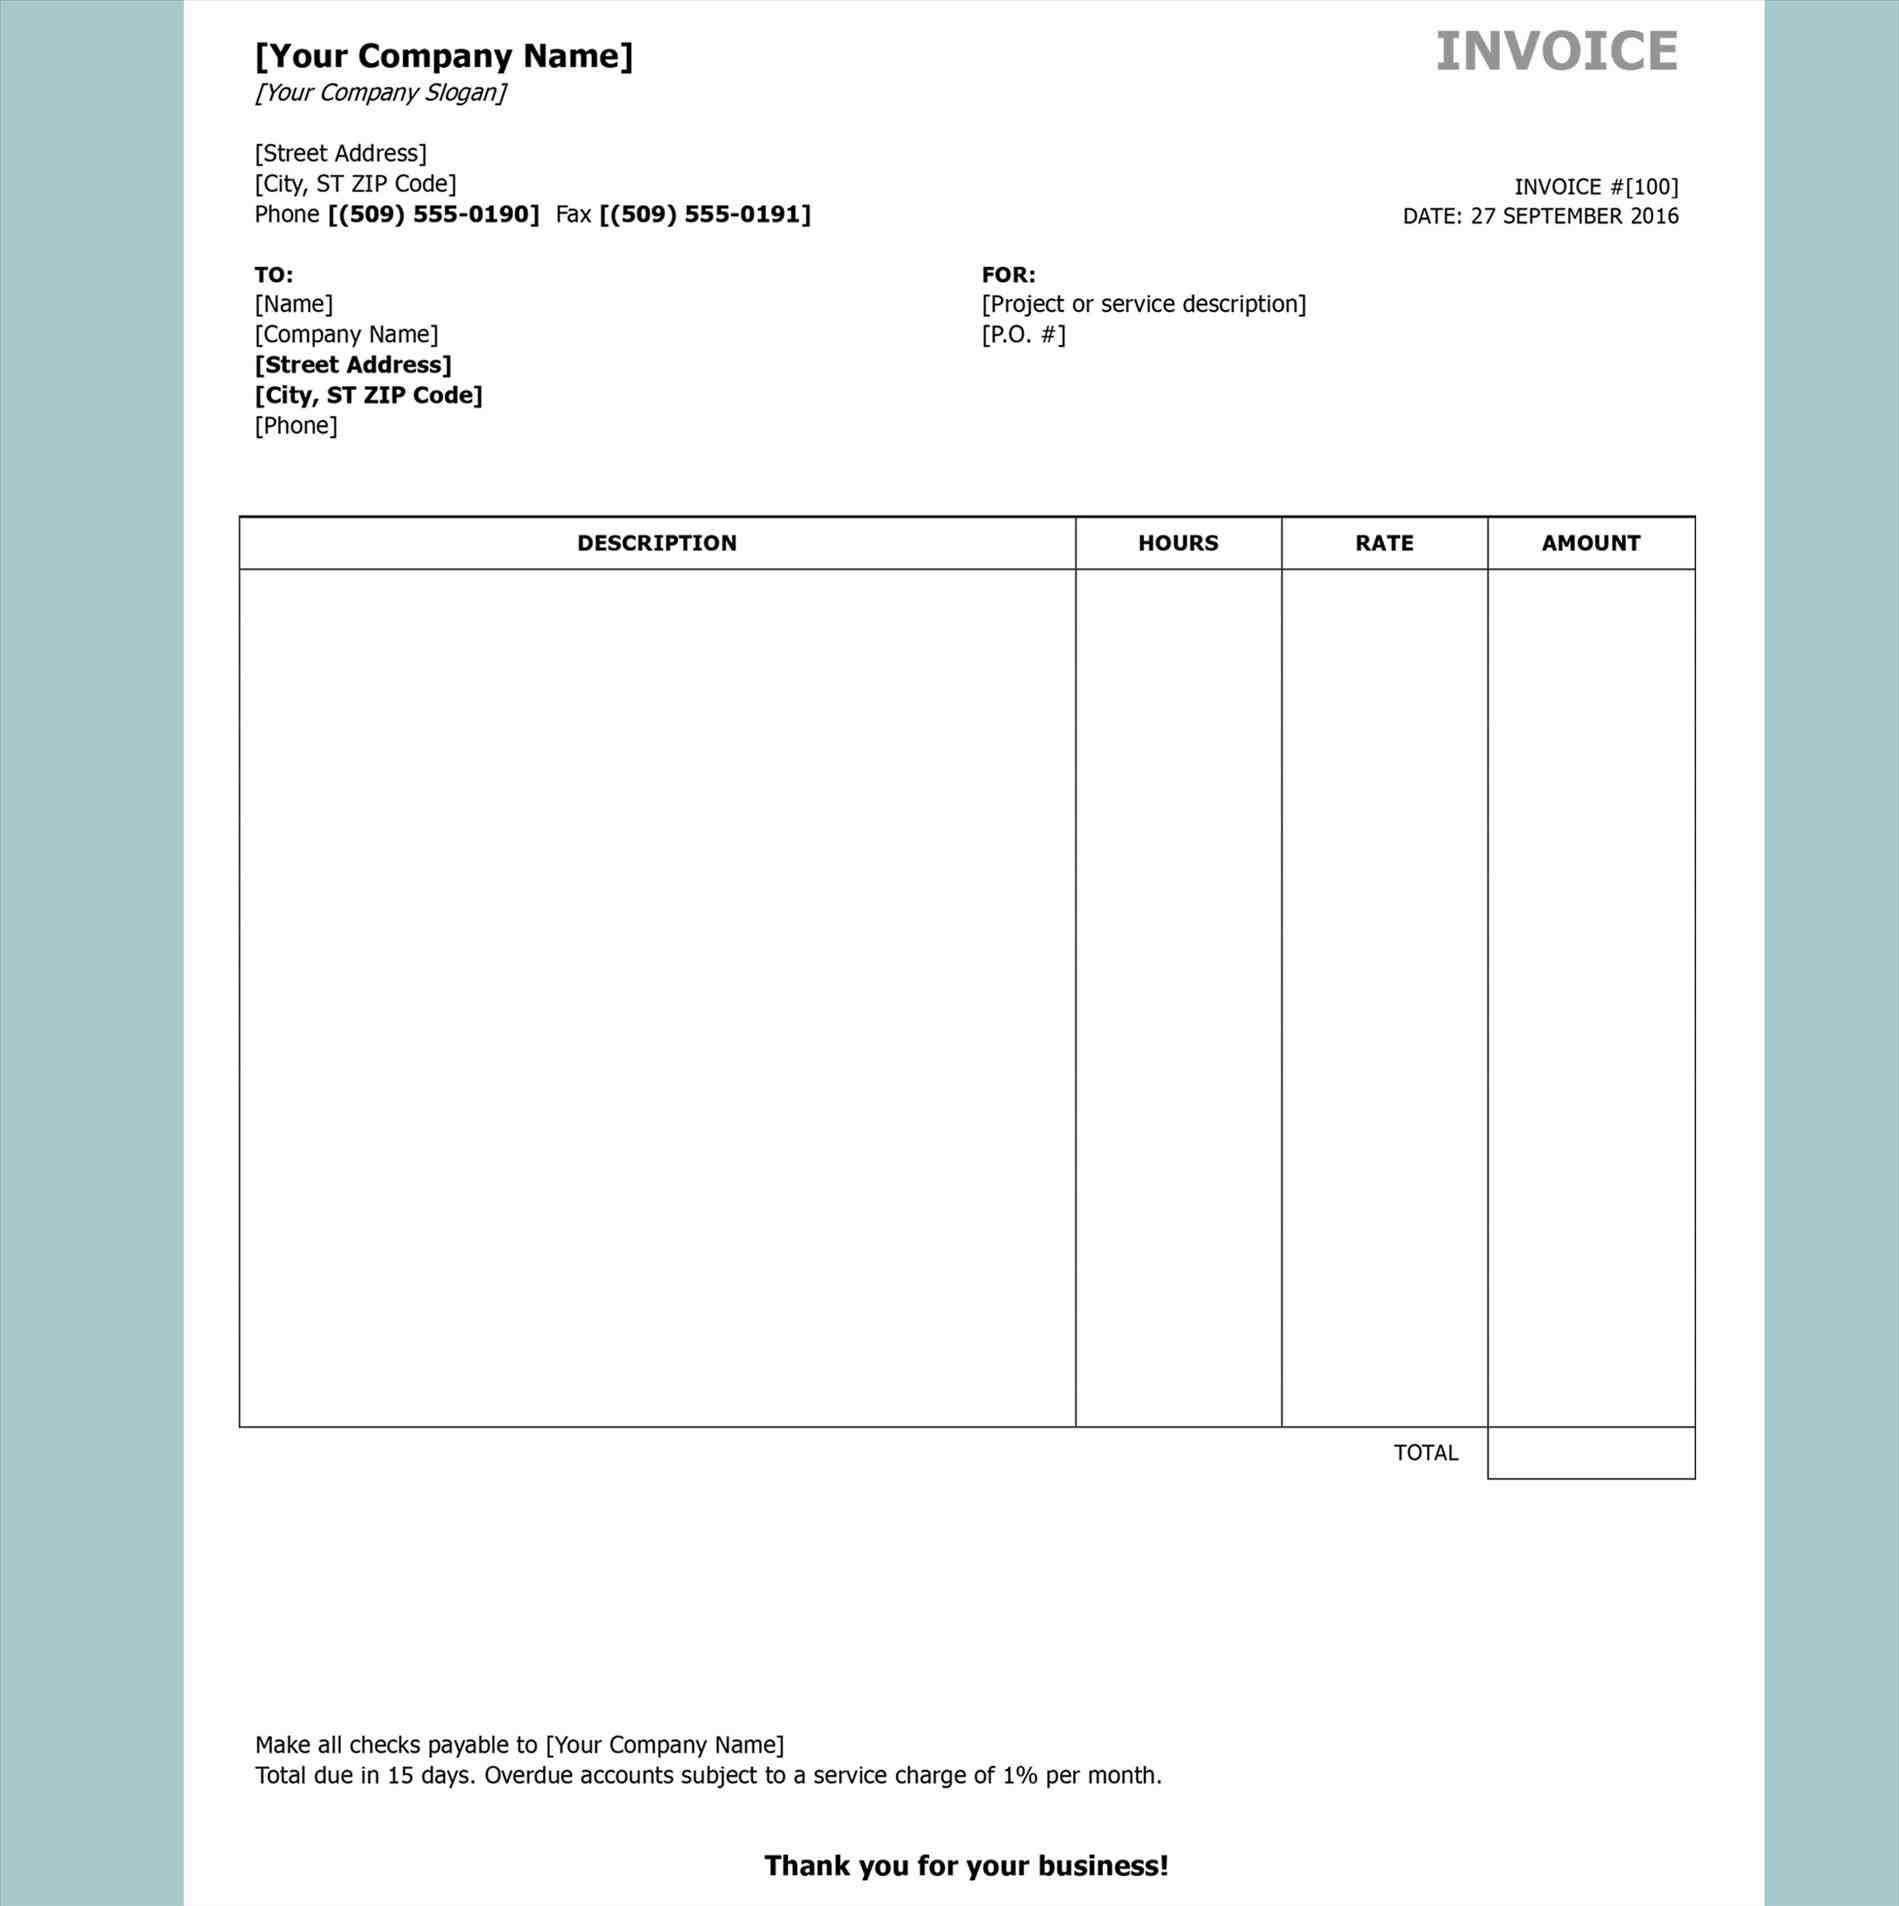 free Free invoice Template templates by berry the grid systemrhthegridsystemorg babfadecdb example of template in word monroerisingcomrhmonroerisingcom babfadecdb Free